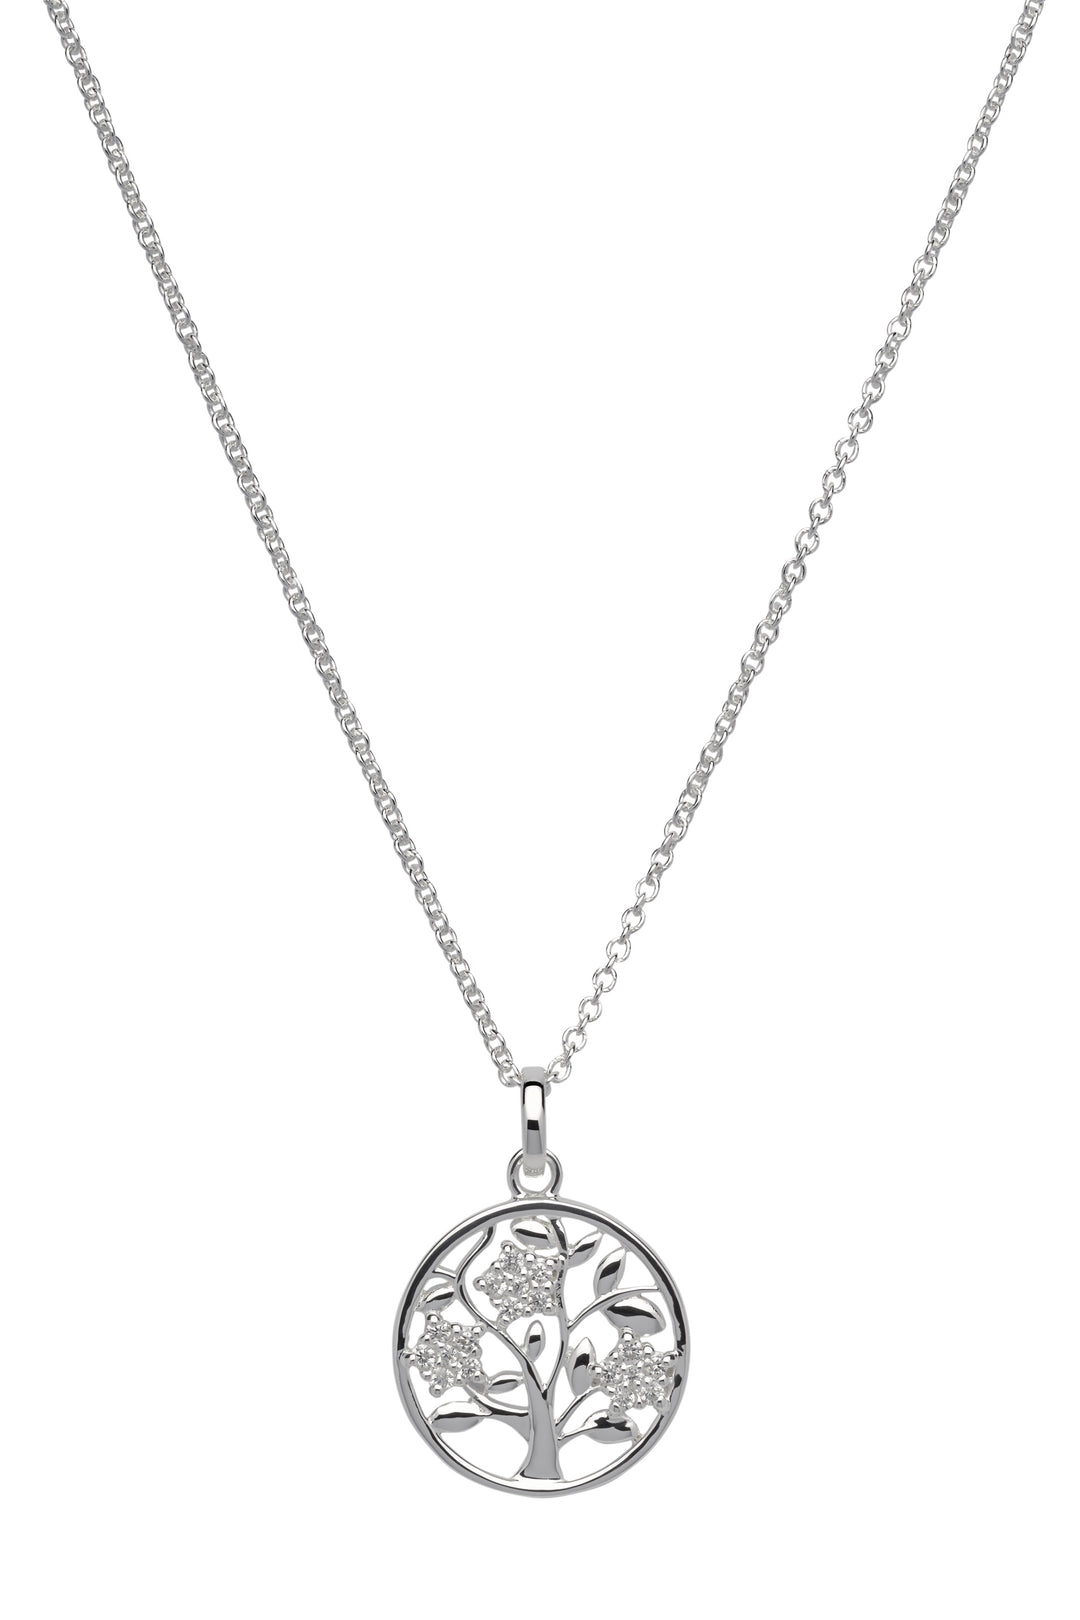 Sterling Silver Tree Of Life CZ Round Pendant and Chain